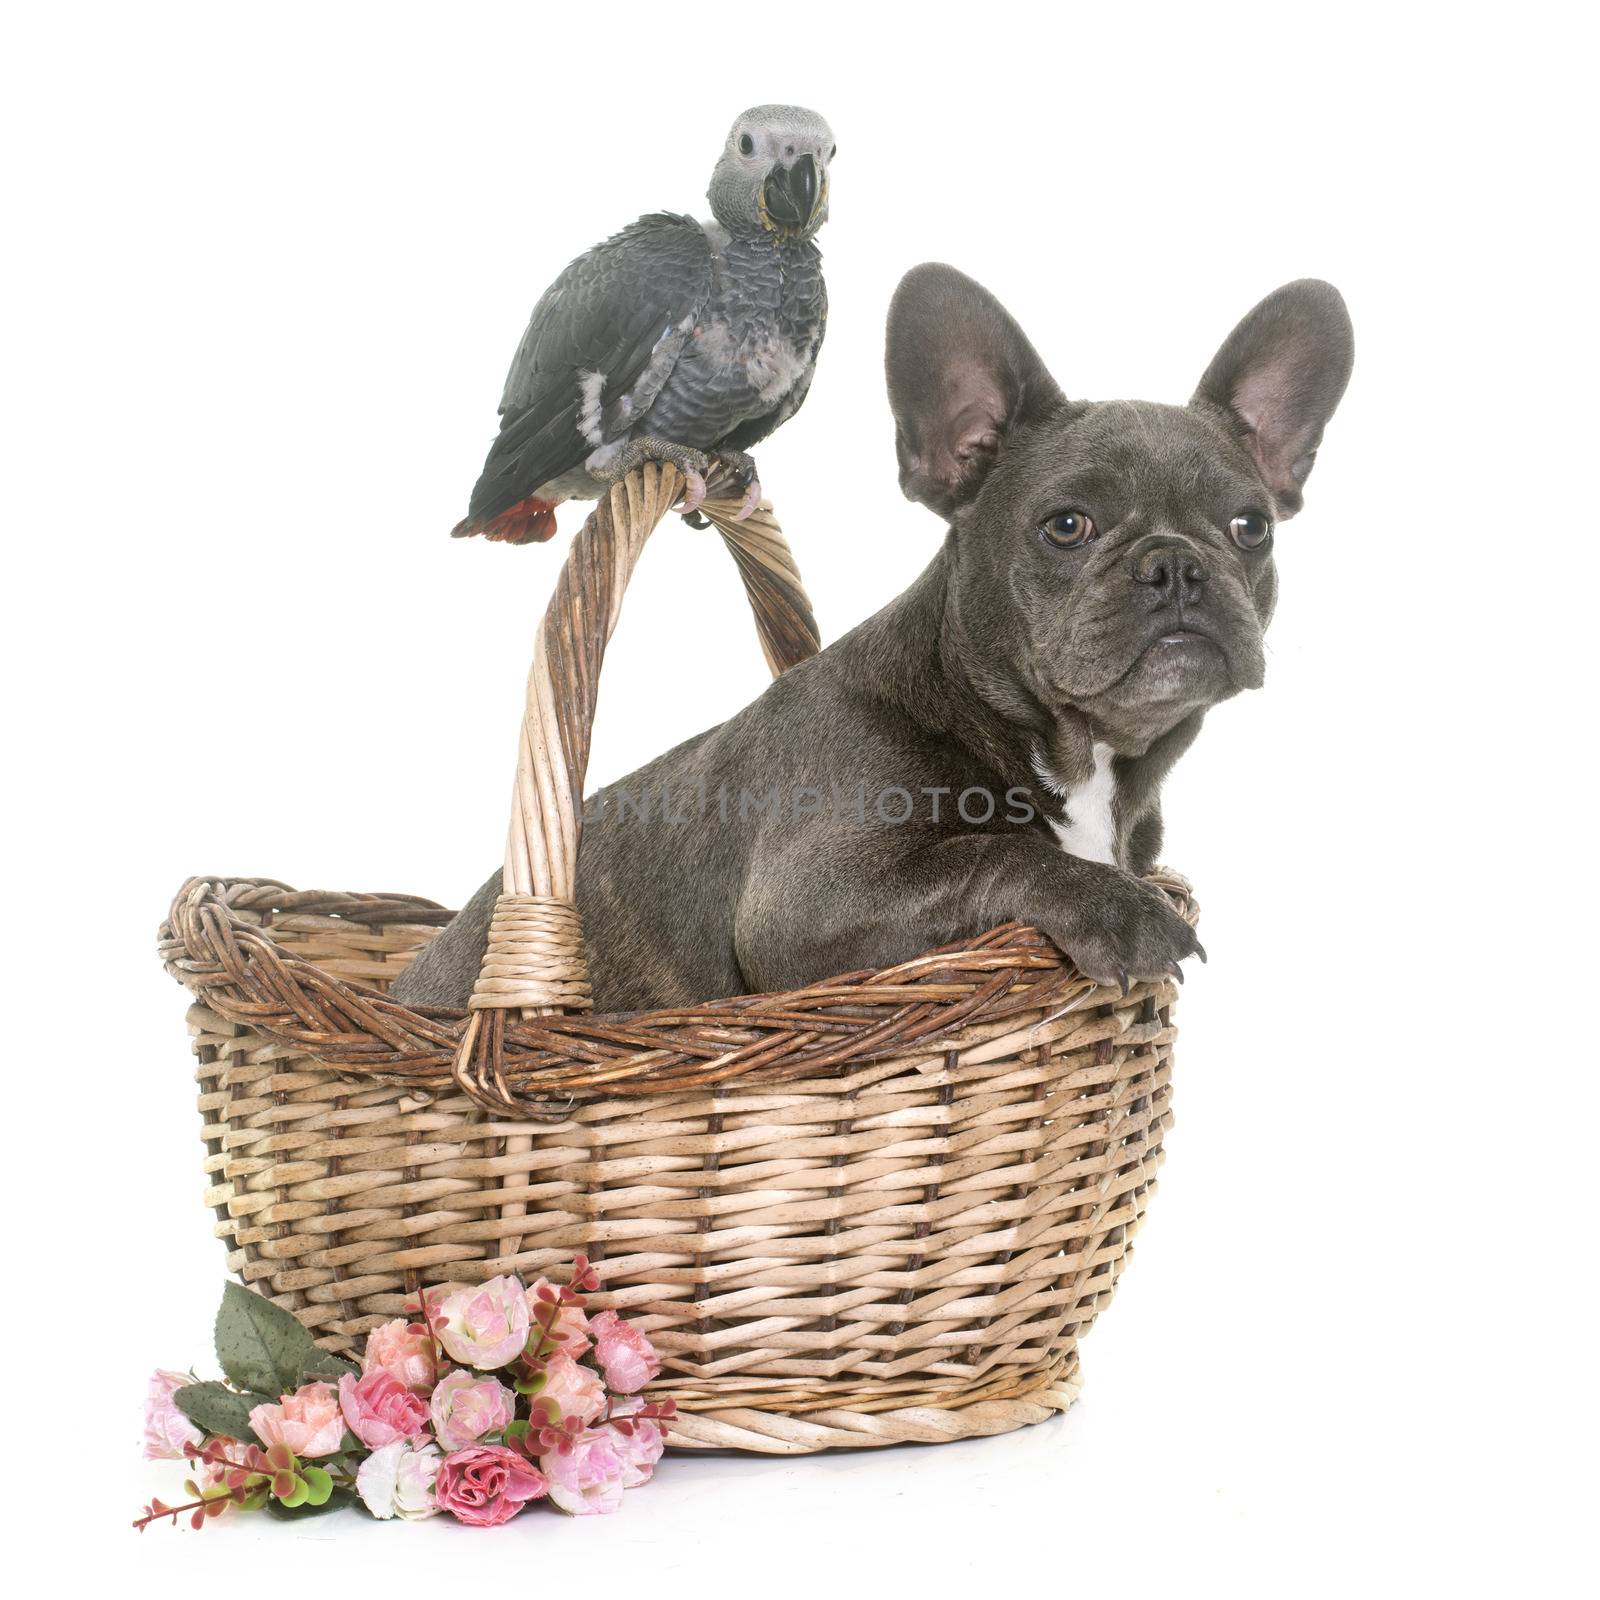 baby gray parrot and puppy bulldog by cynoclub